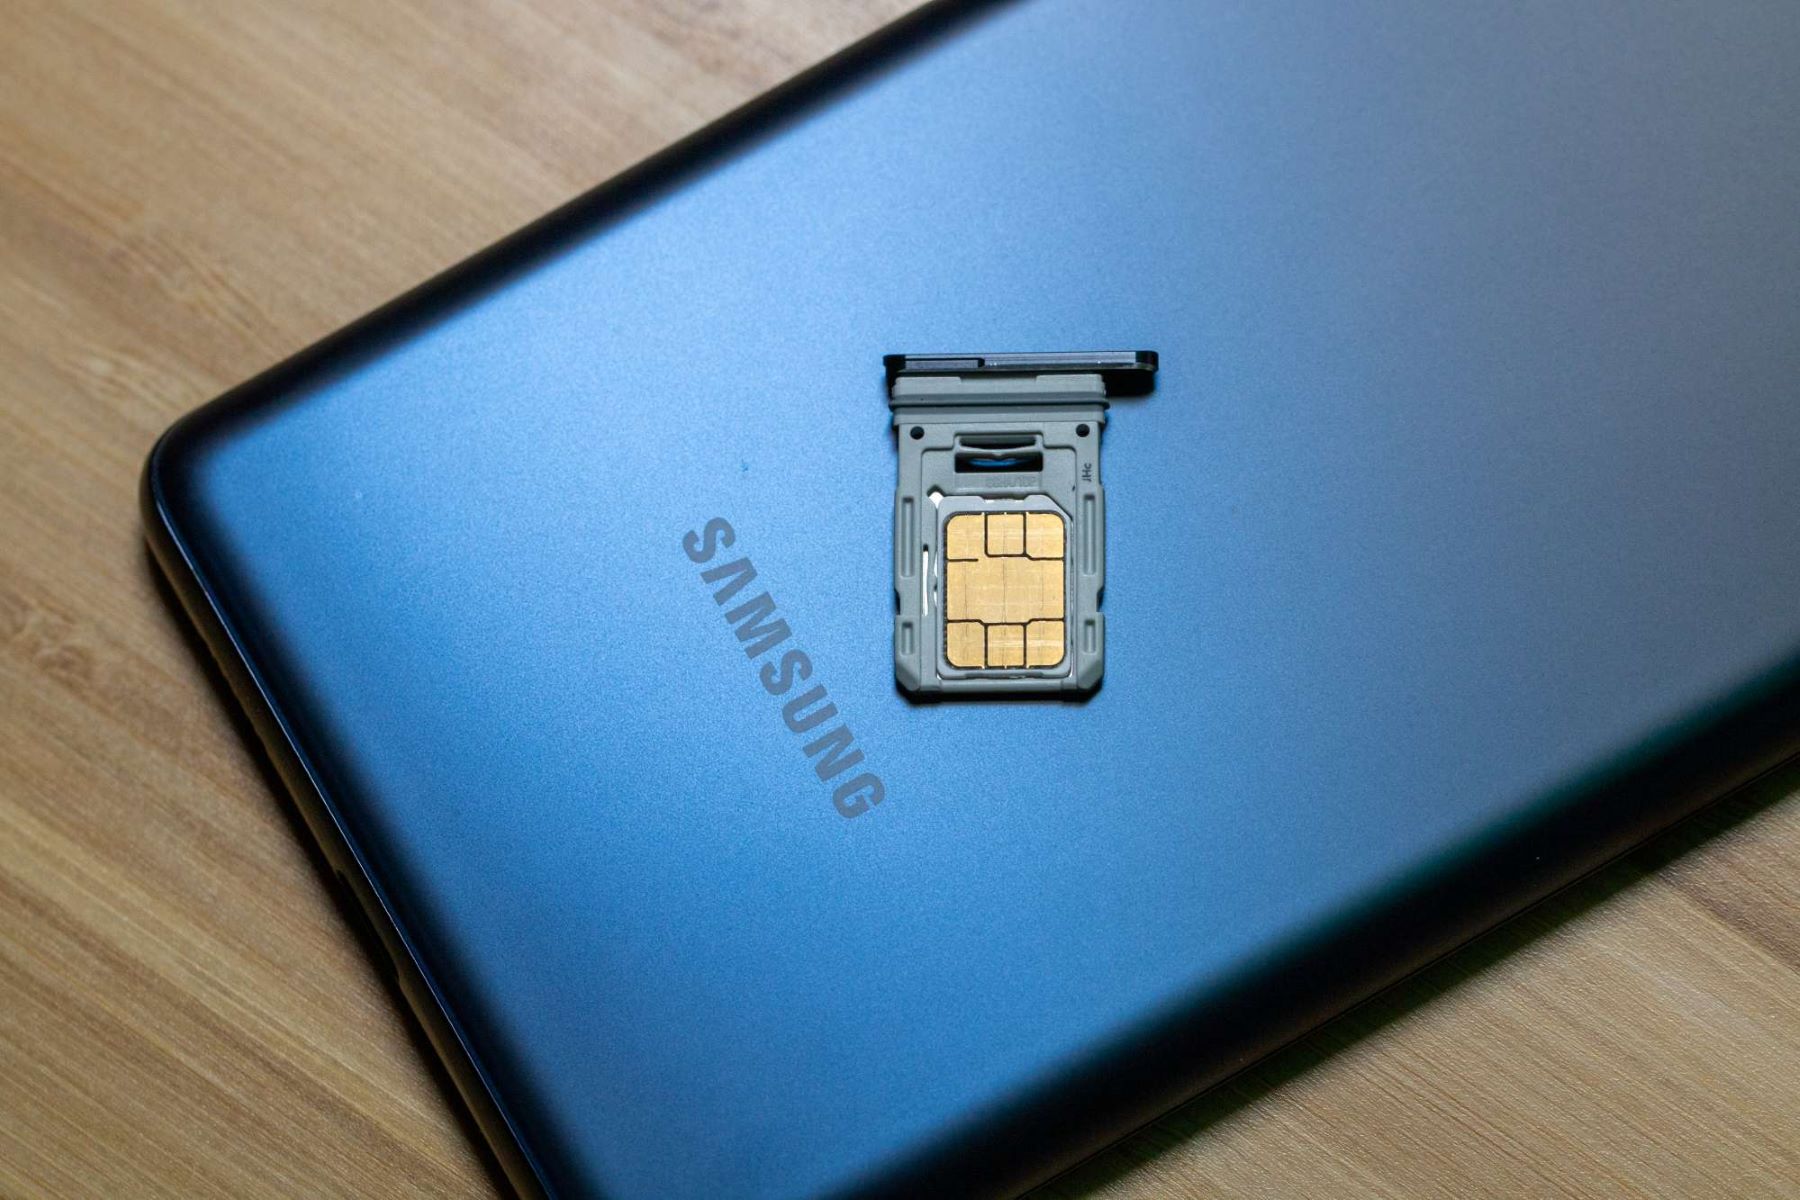 Changing SIM Card On Samsung: Illustrated Instructions